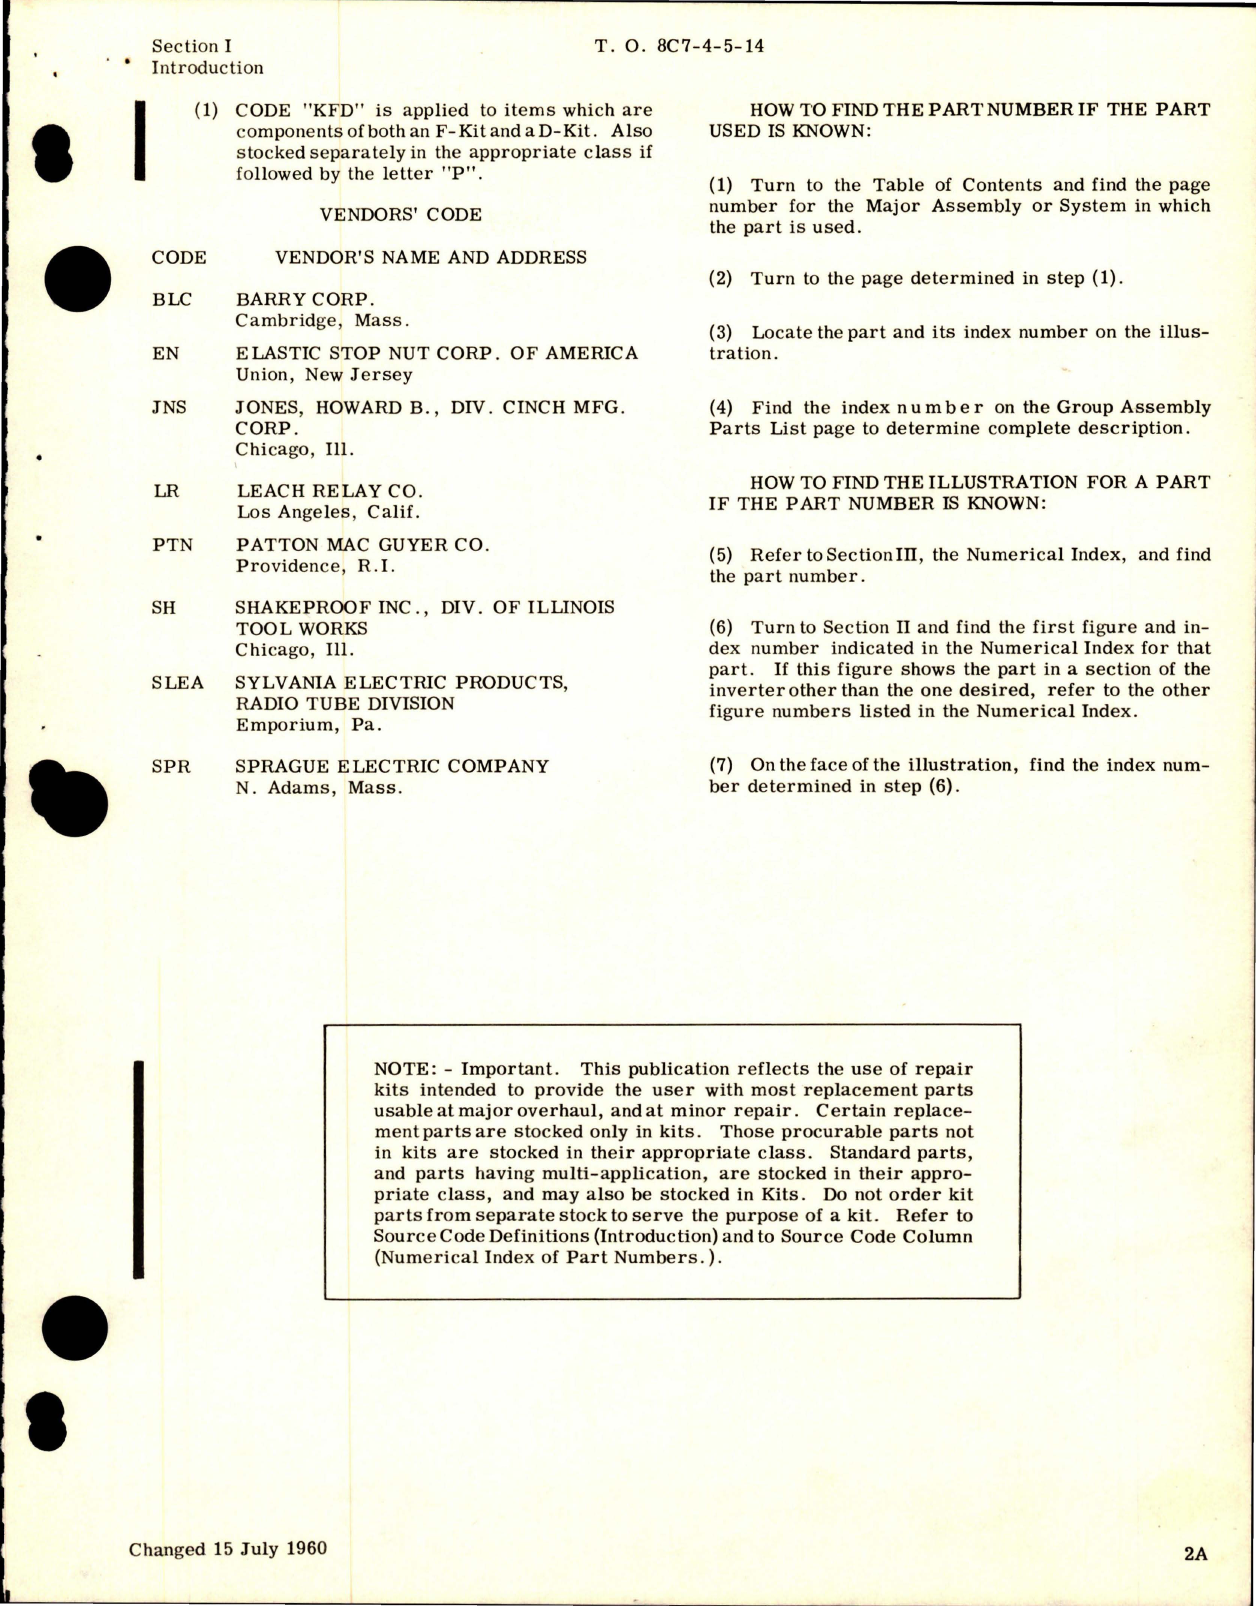 Sample page 5 from AirCorps Library document: Illustrated Parts Breakdown for AN 3534-1 Inverter - Part SE-2-1, SE-2-1A, SE-2-2, and SE-2-2A 